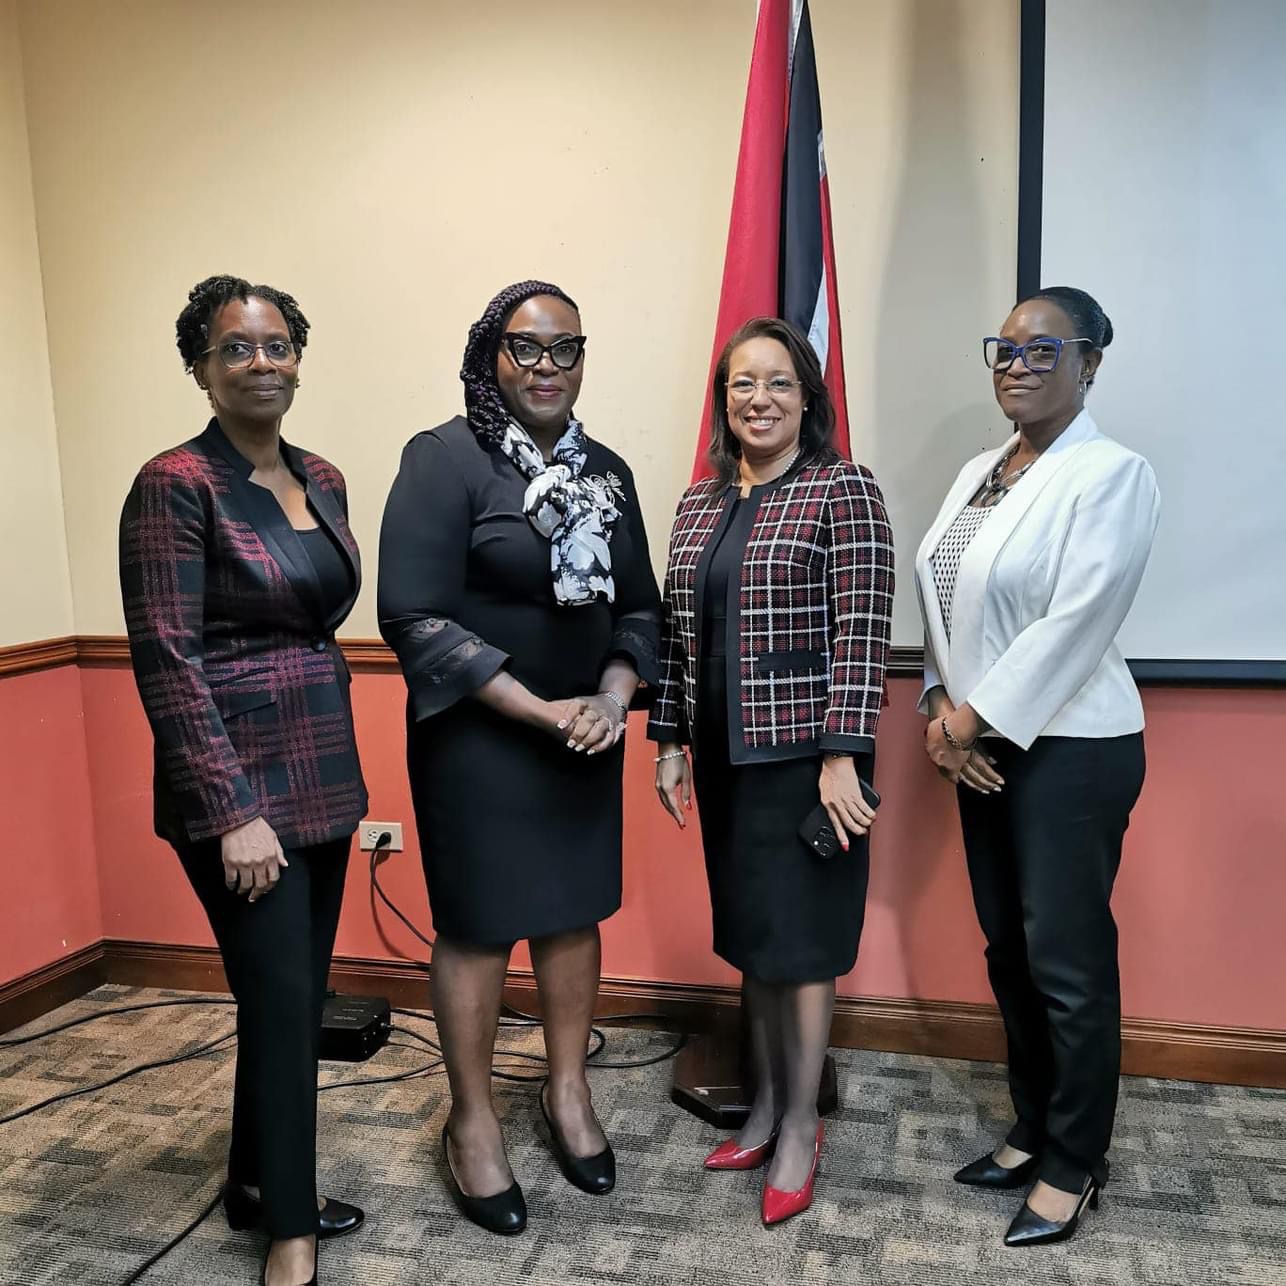 Officials from the Ministry of National Security and the Tobago House of Assembly, from left to right -  Mrs. Nataki Atiba-Dilchan, Mrs. Denese Toby-Quashie, Chief Administrator, Ms. Natasha Barrow and Dr. Simone Titus